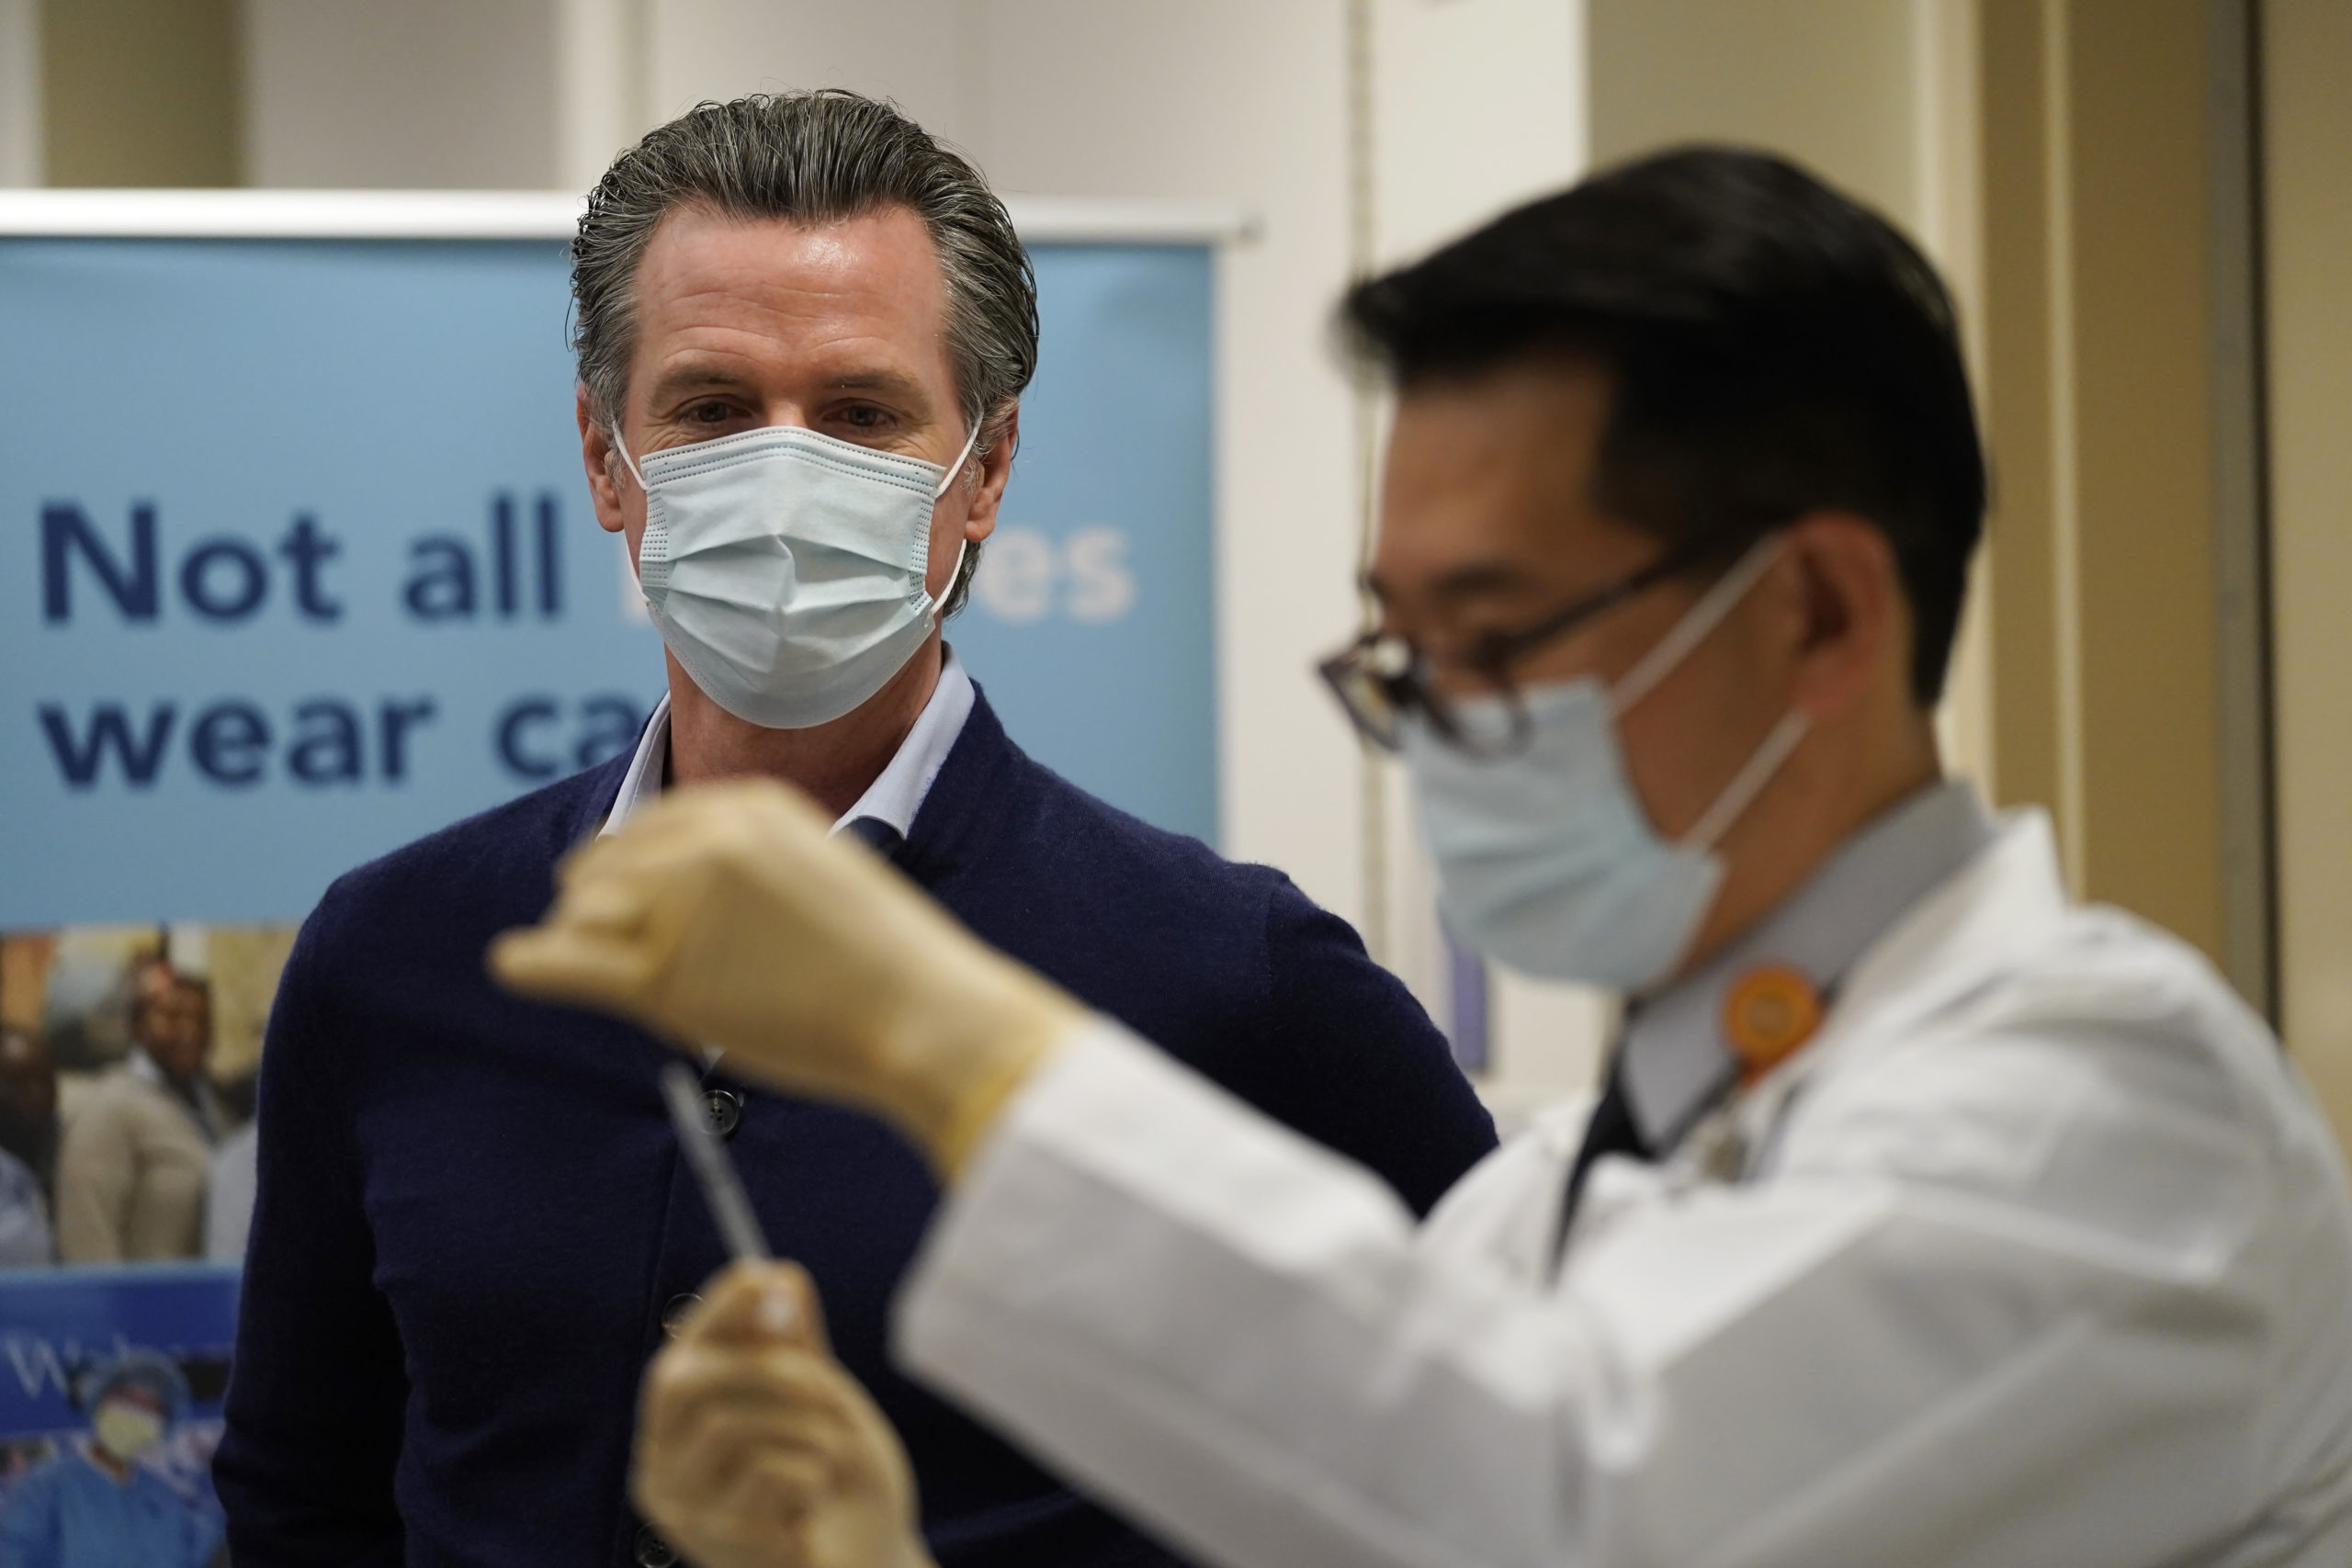 Governor Gavin Newsom watches as the Pfizer-BioNTech COVID-19 vaccine is prepared by Director of Inpatient Pharmacy David Cheng at Kaiser Permanente Los Angeles Medical Center in Los Angeles, California on December 14, 2020. - The United States kicked off a mass vaccination drive Monday hoping to turn the tide on the world's biggest coronavirus outbreak, as the country's death toll neared a staggering 300,000. JAE HONG/POOL/AFP via Getty Images